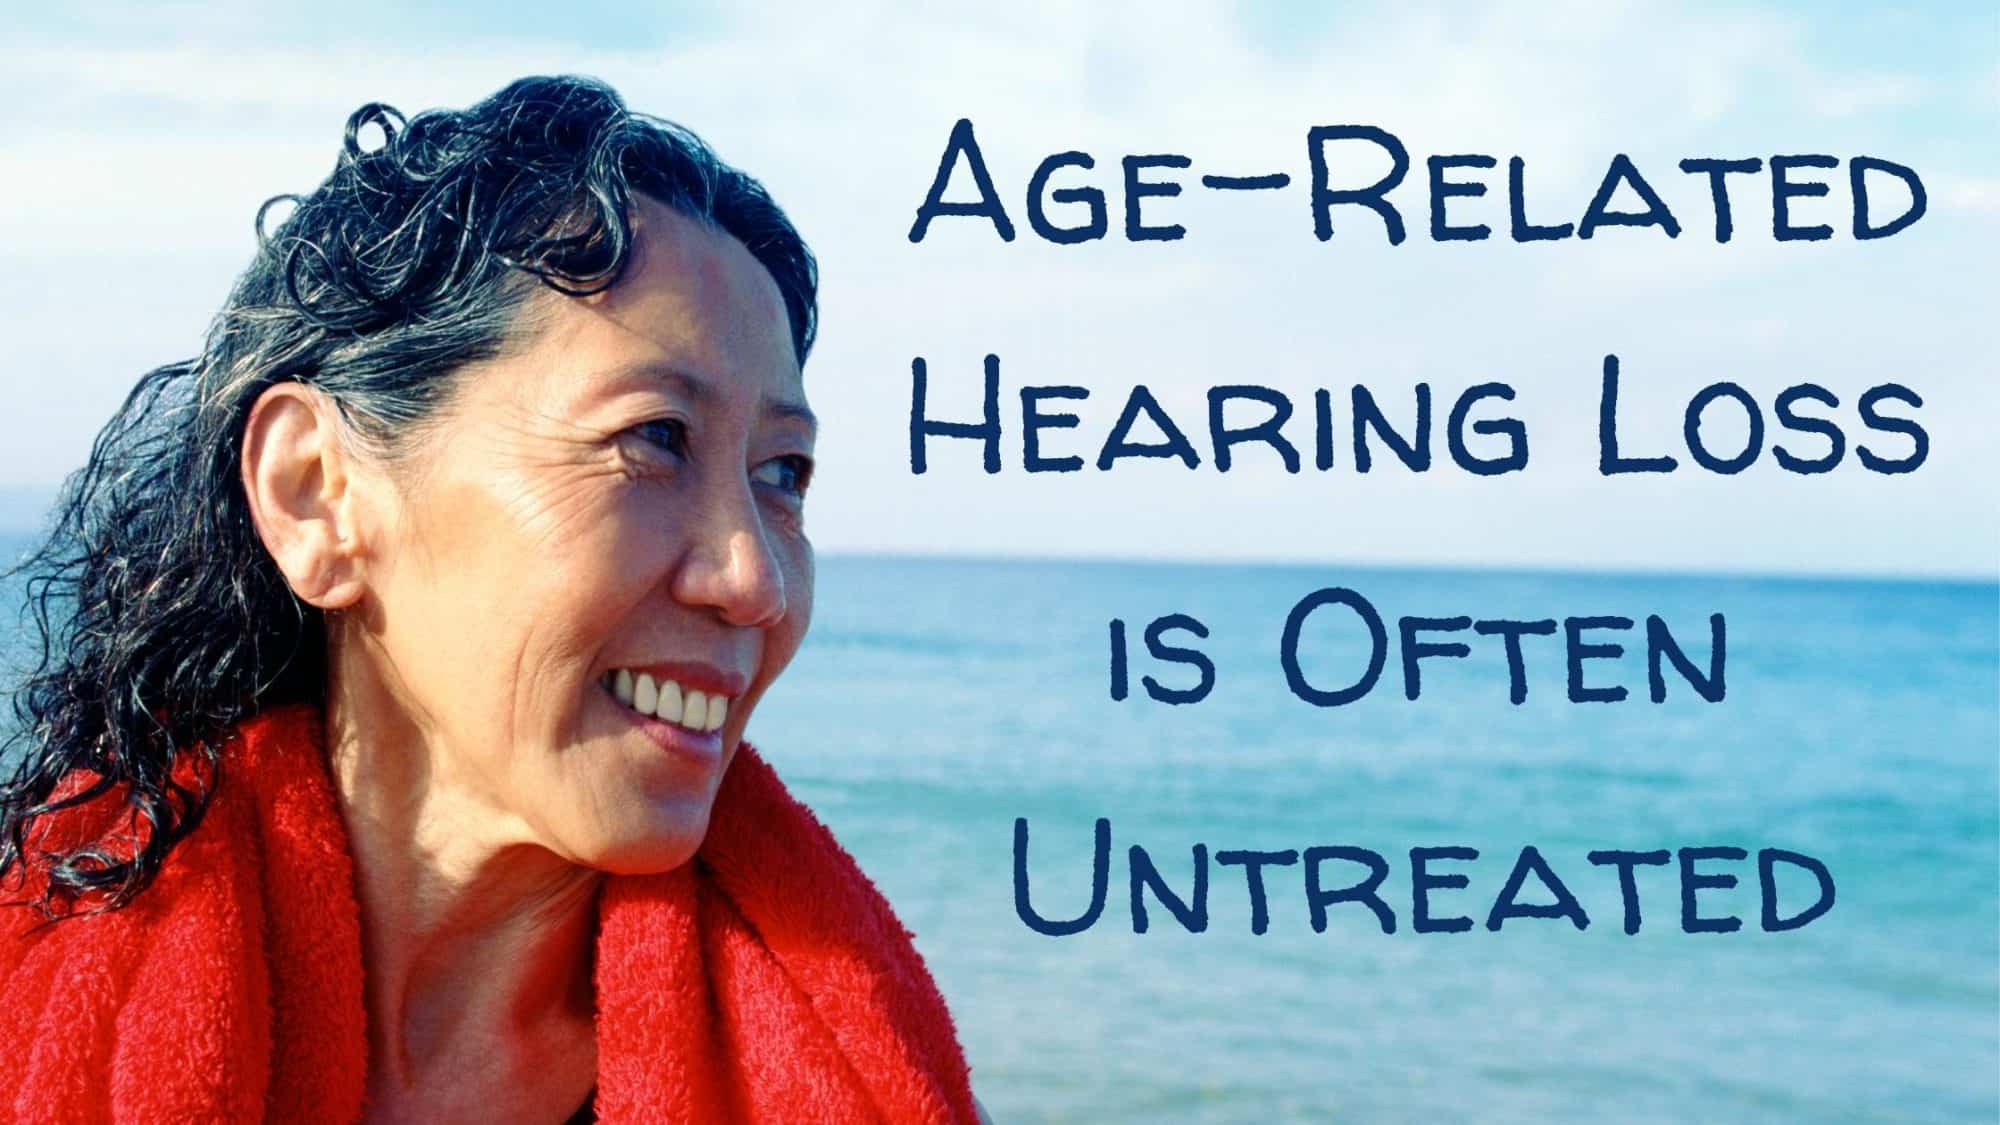 Age-Related Hearing Loss is Often Untreated